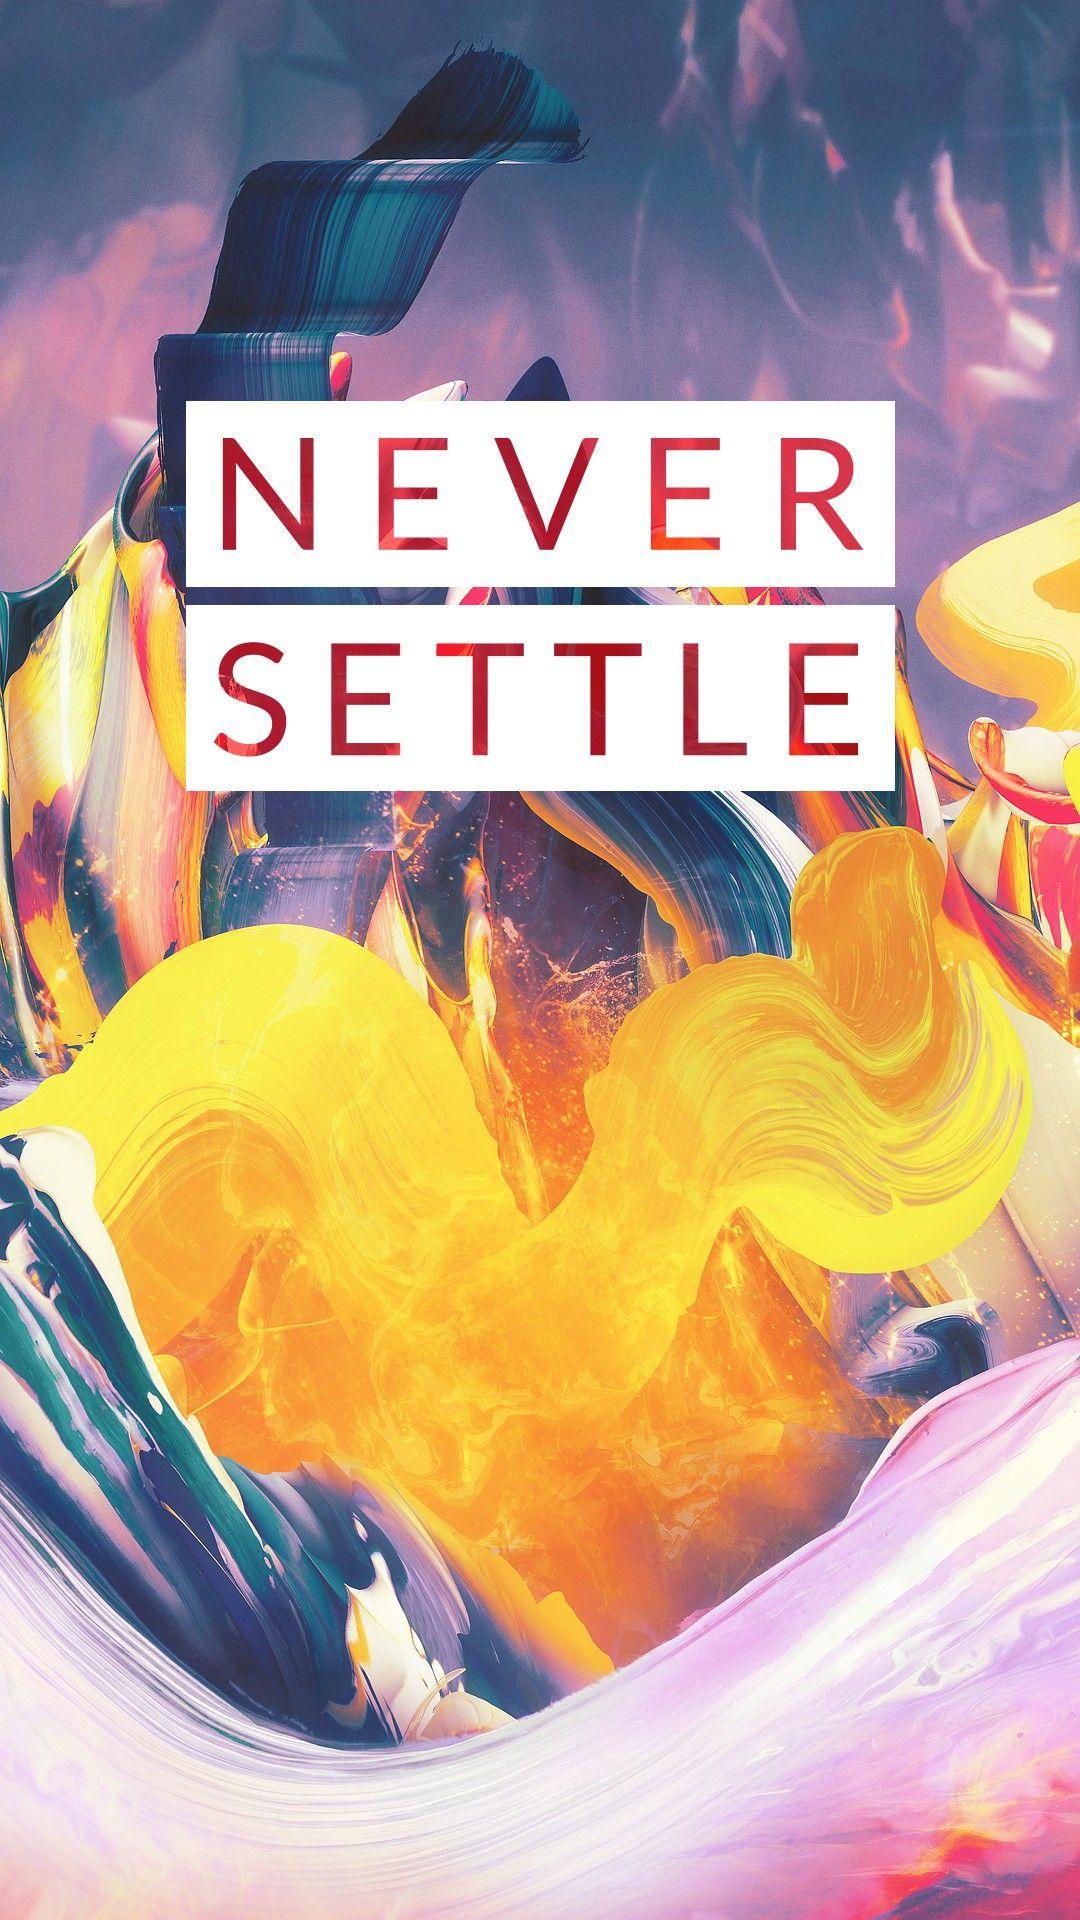 OnePlus 3T Wallpaper Up for Download, Along with the Story of Their